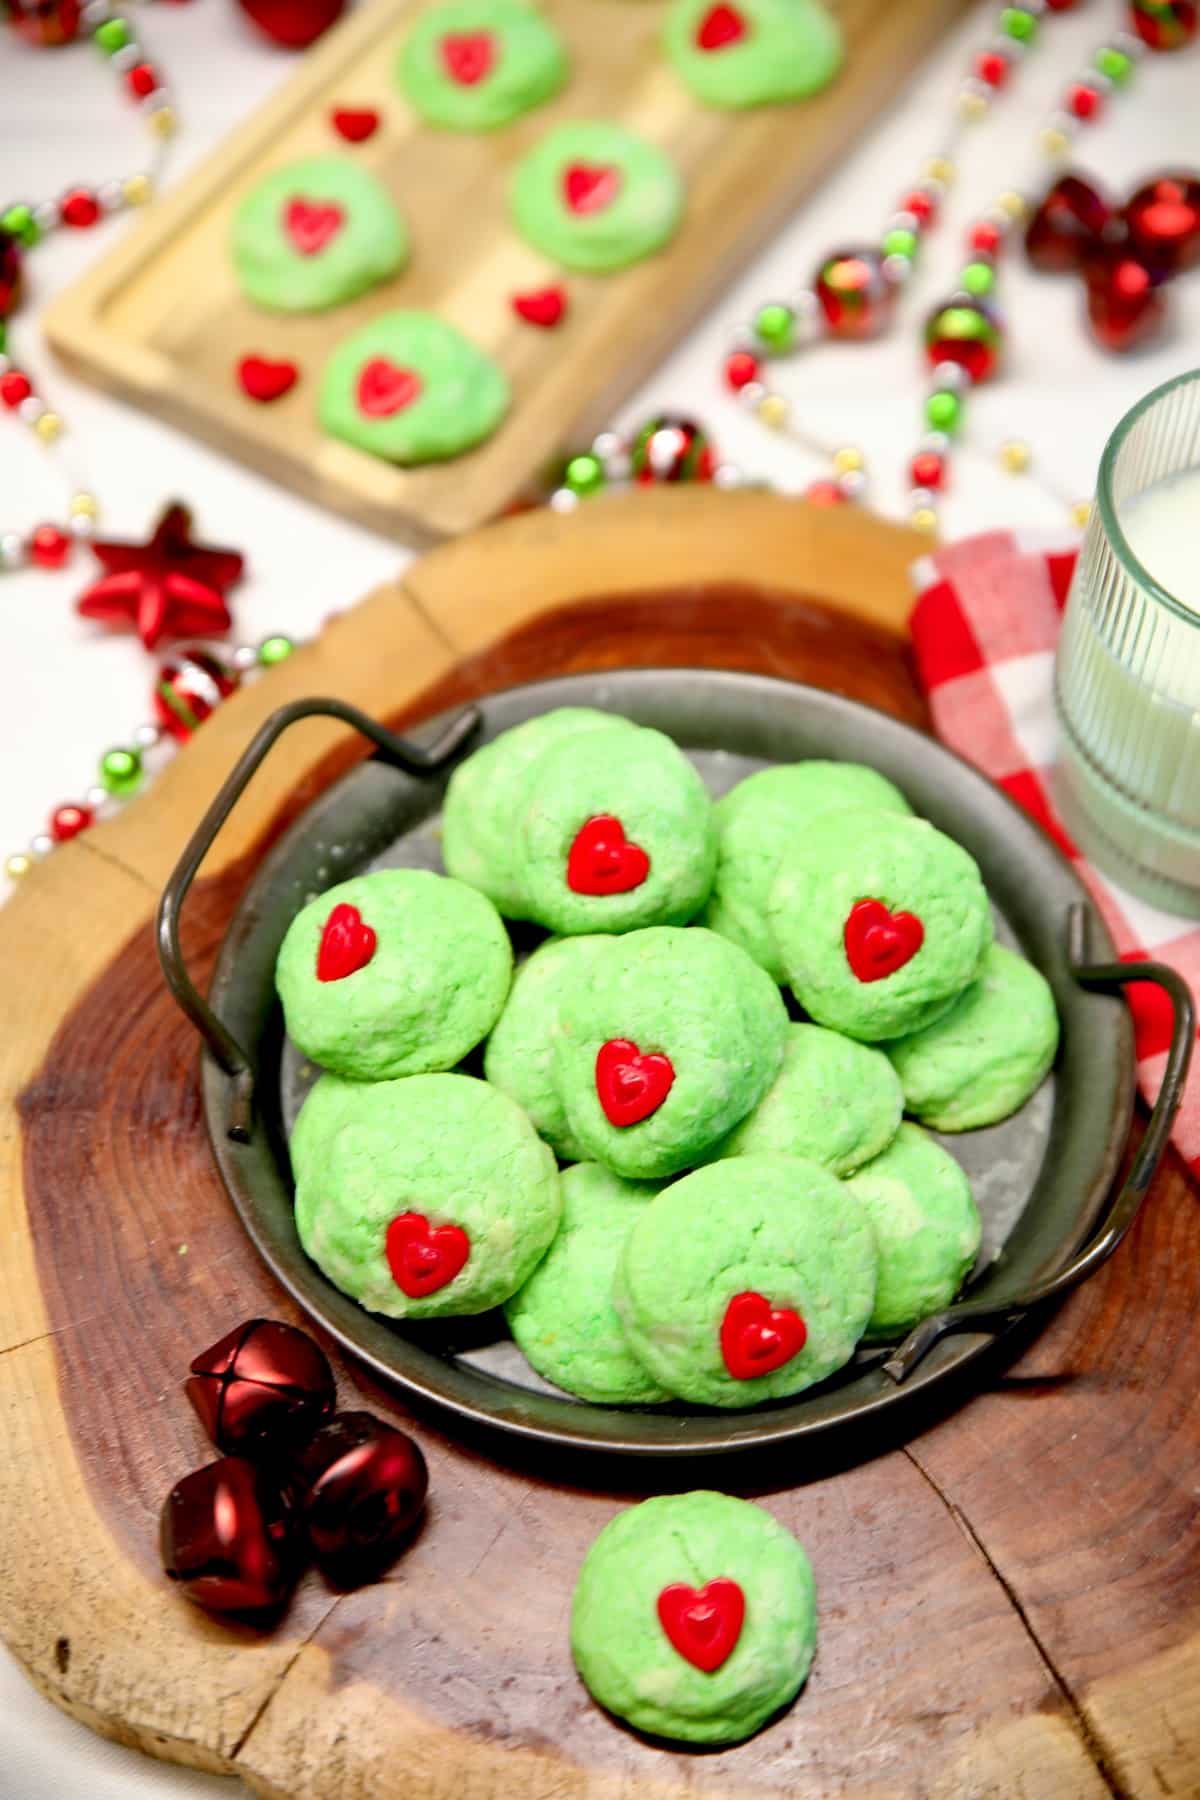 Platter of green Grinch cookies with red candy hearts.